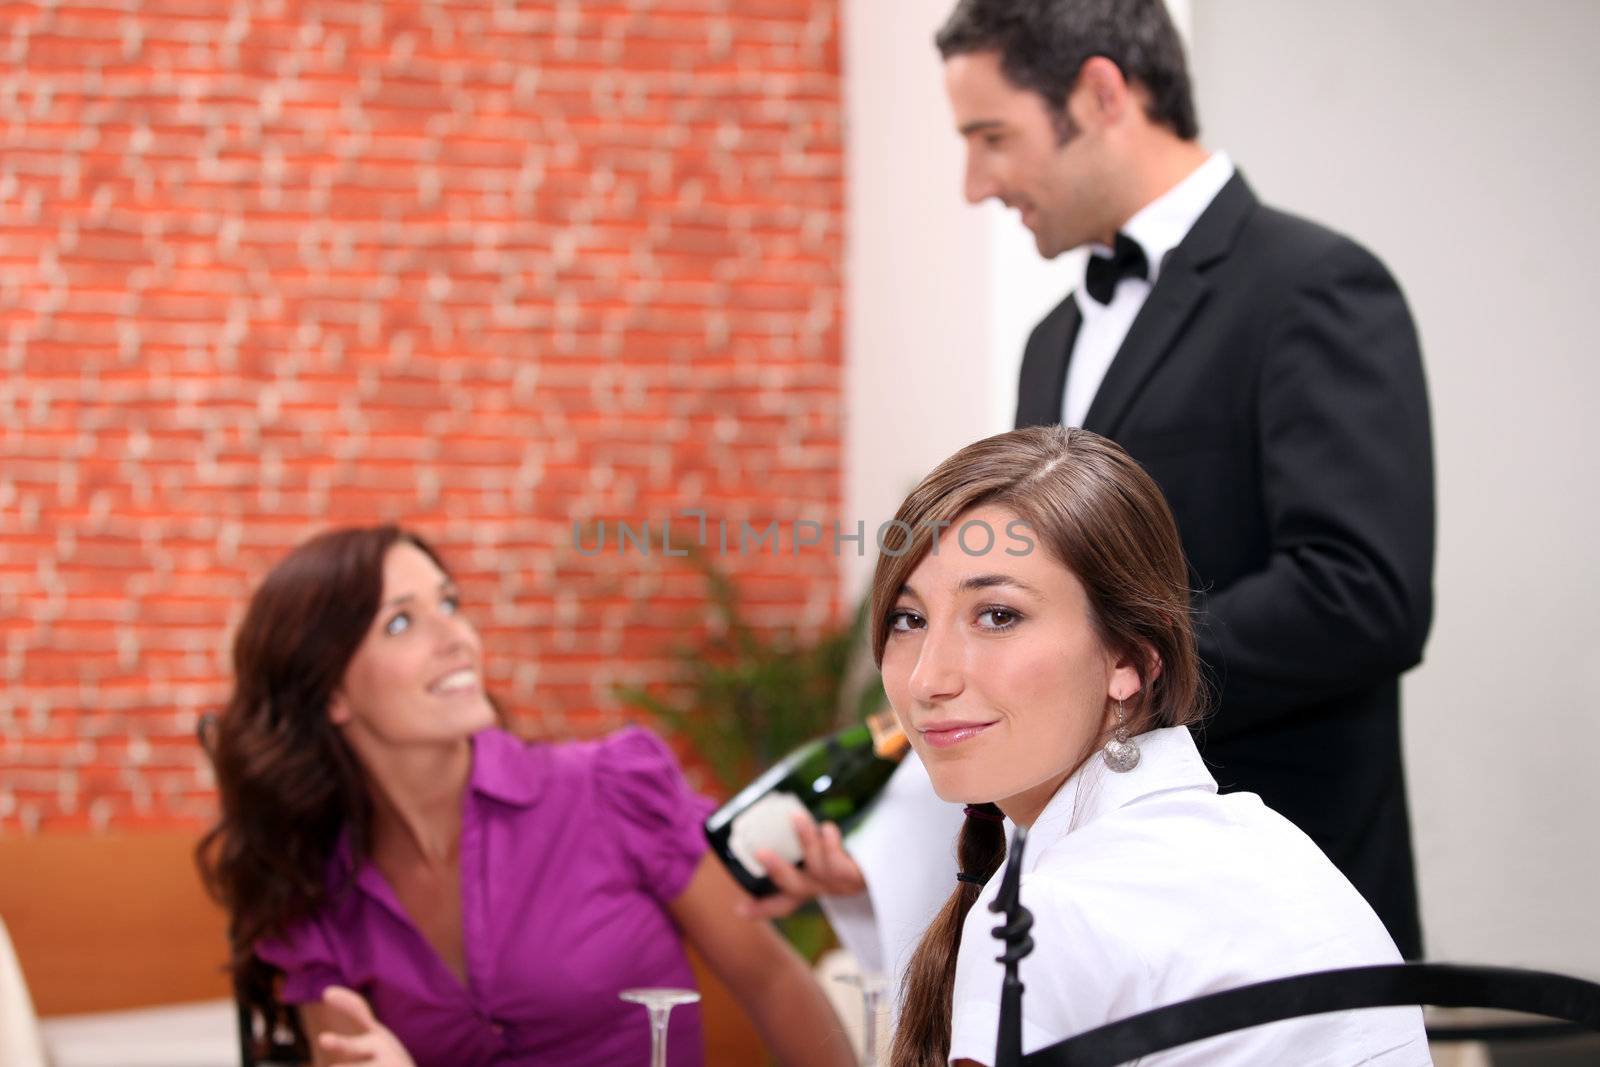 wine waiter showing a sparkling wine bottle to customers